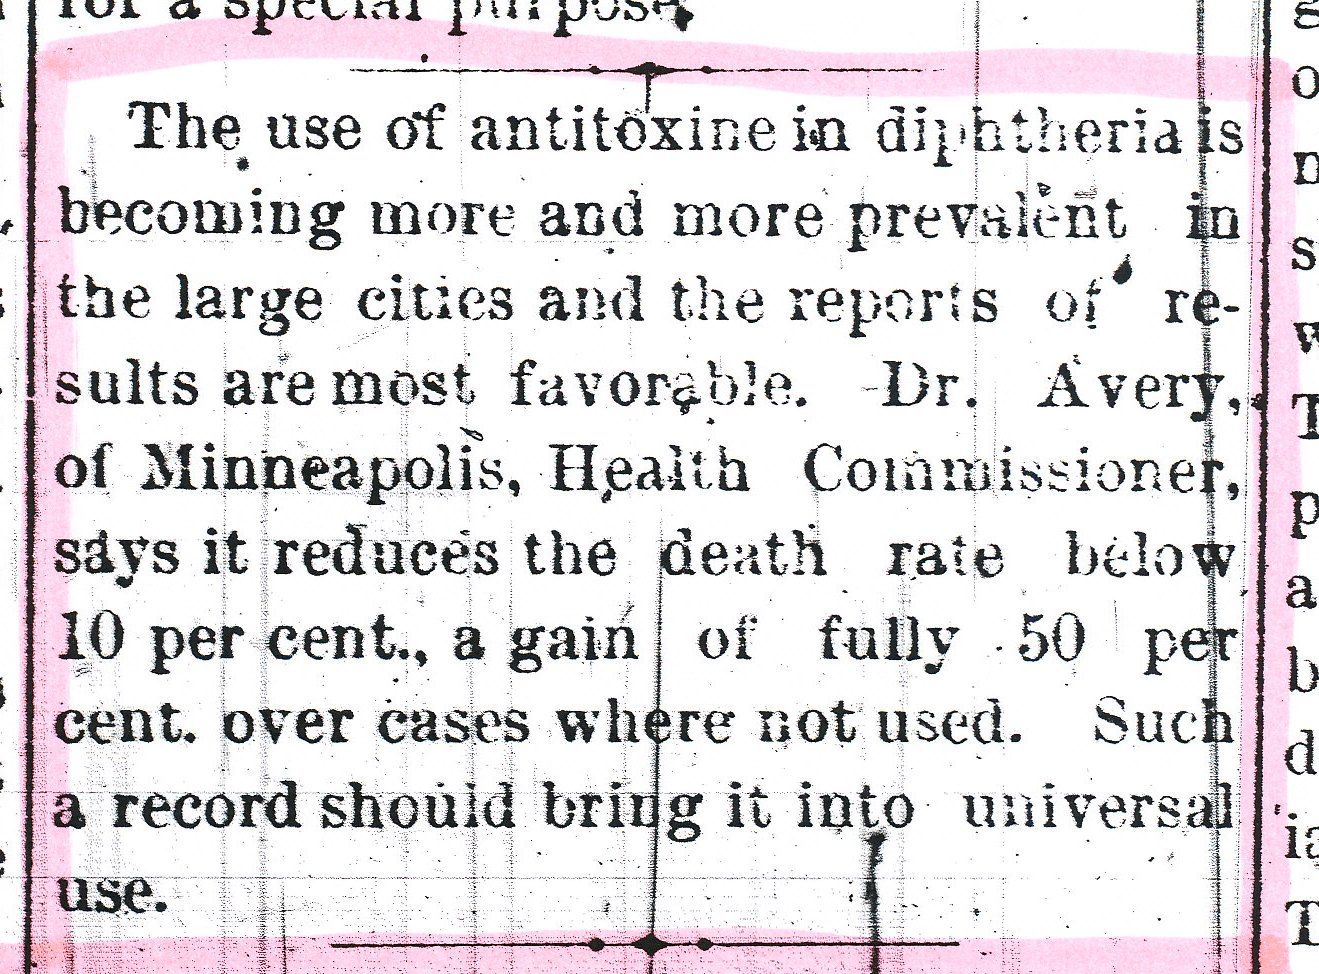 As mentioned in another blog, the anti-toxin was in use by 1895. If Addie *did* have diphtheria - which she did NOT - this anti-toxin had already proven itself to be a good remedy. 